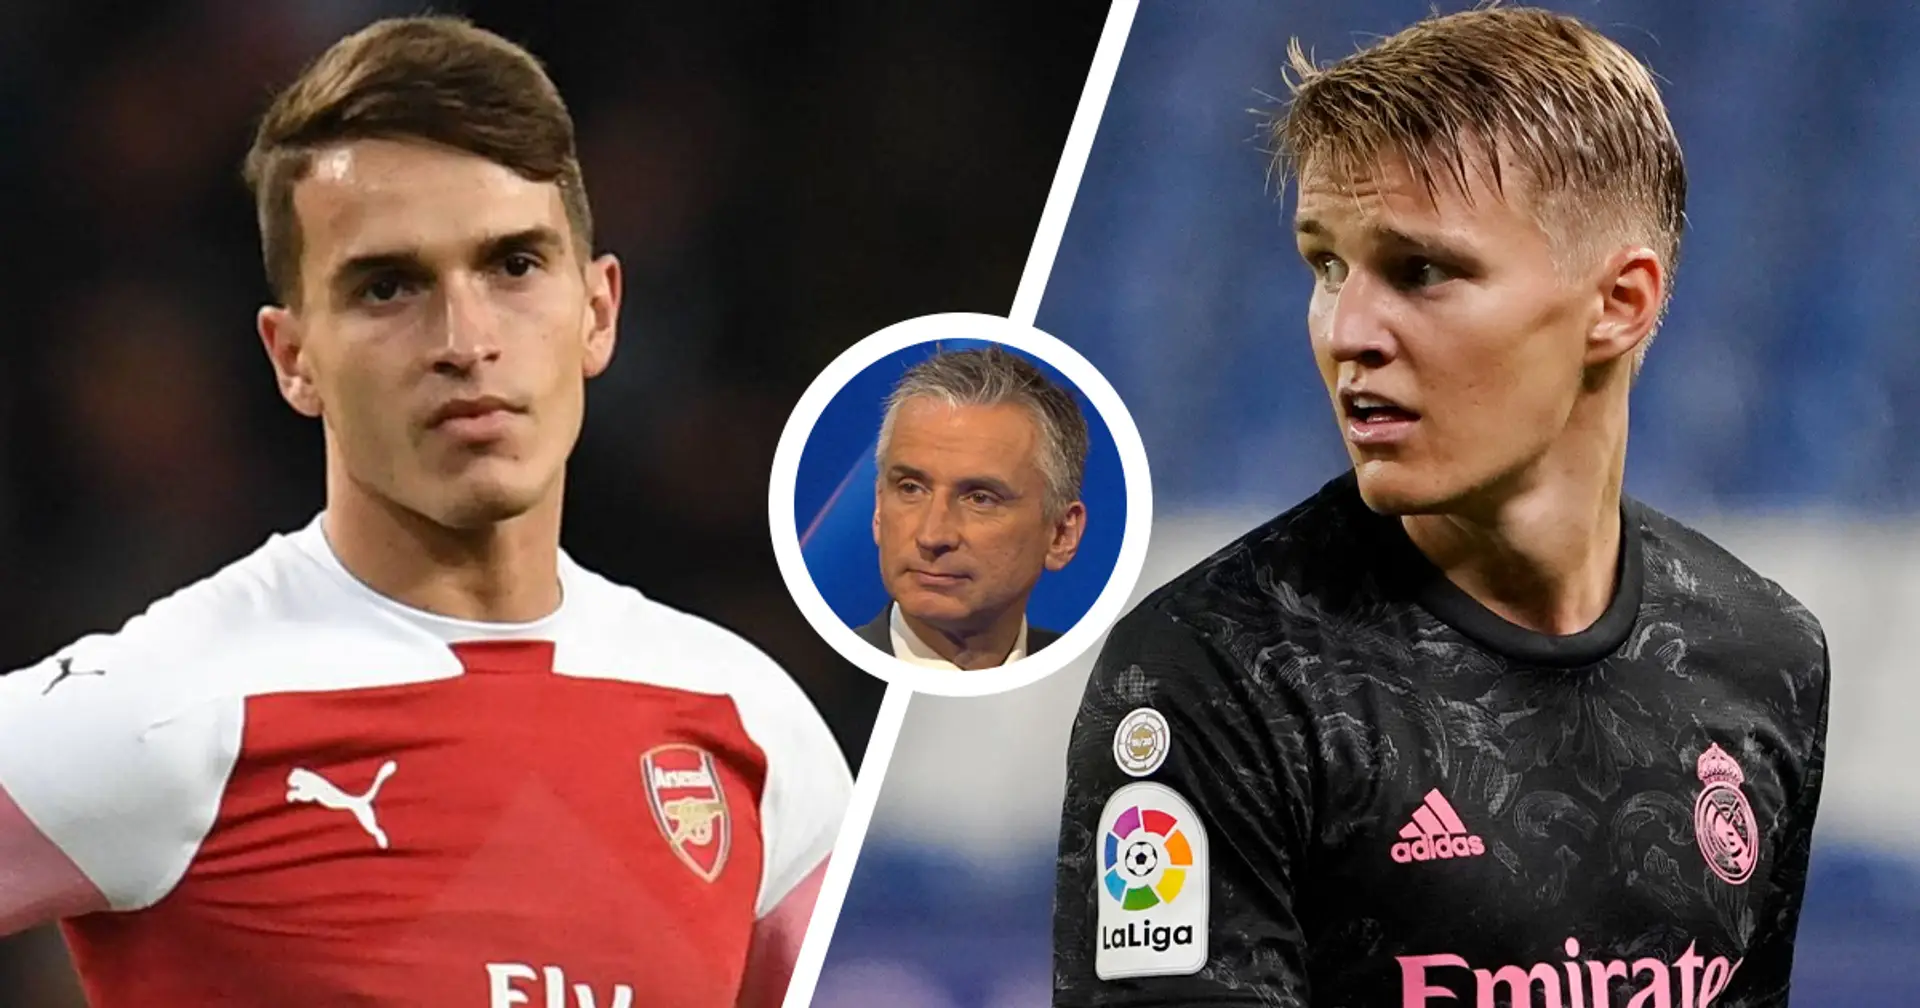 'He’s had his problems developing at Real Madrid': Alan Smith hopes Arsenal have done their homework on Odegaard and will avoid Denis Suarez mistake